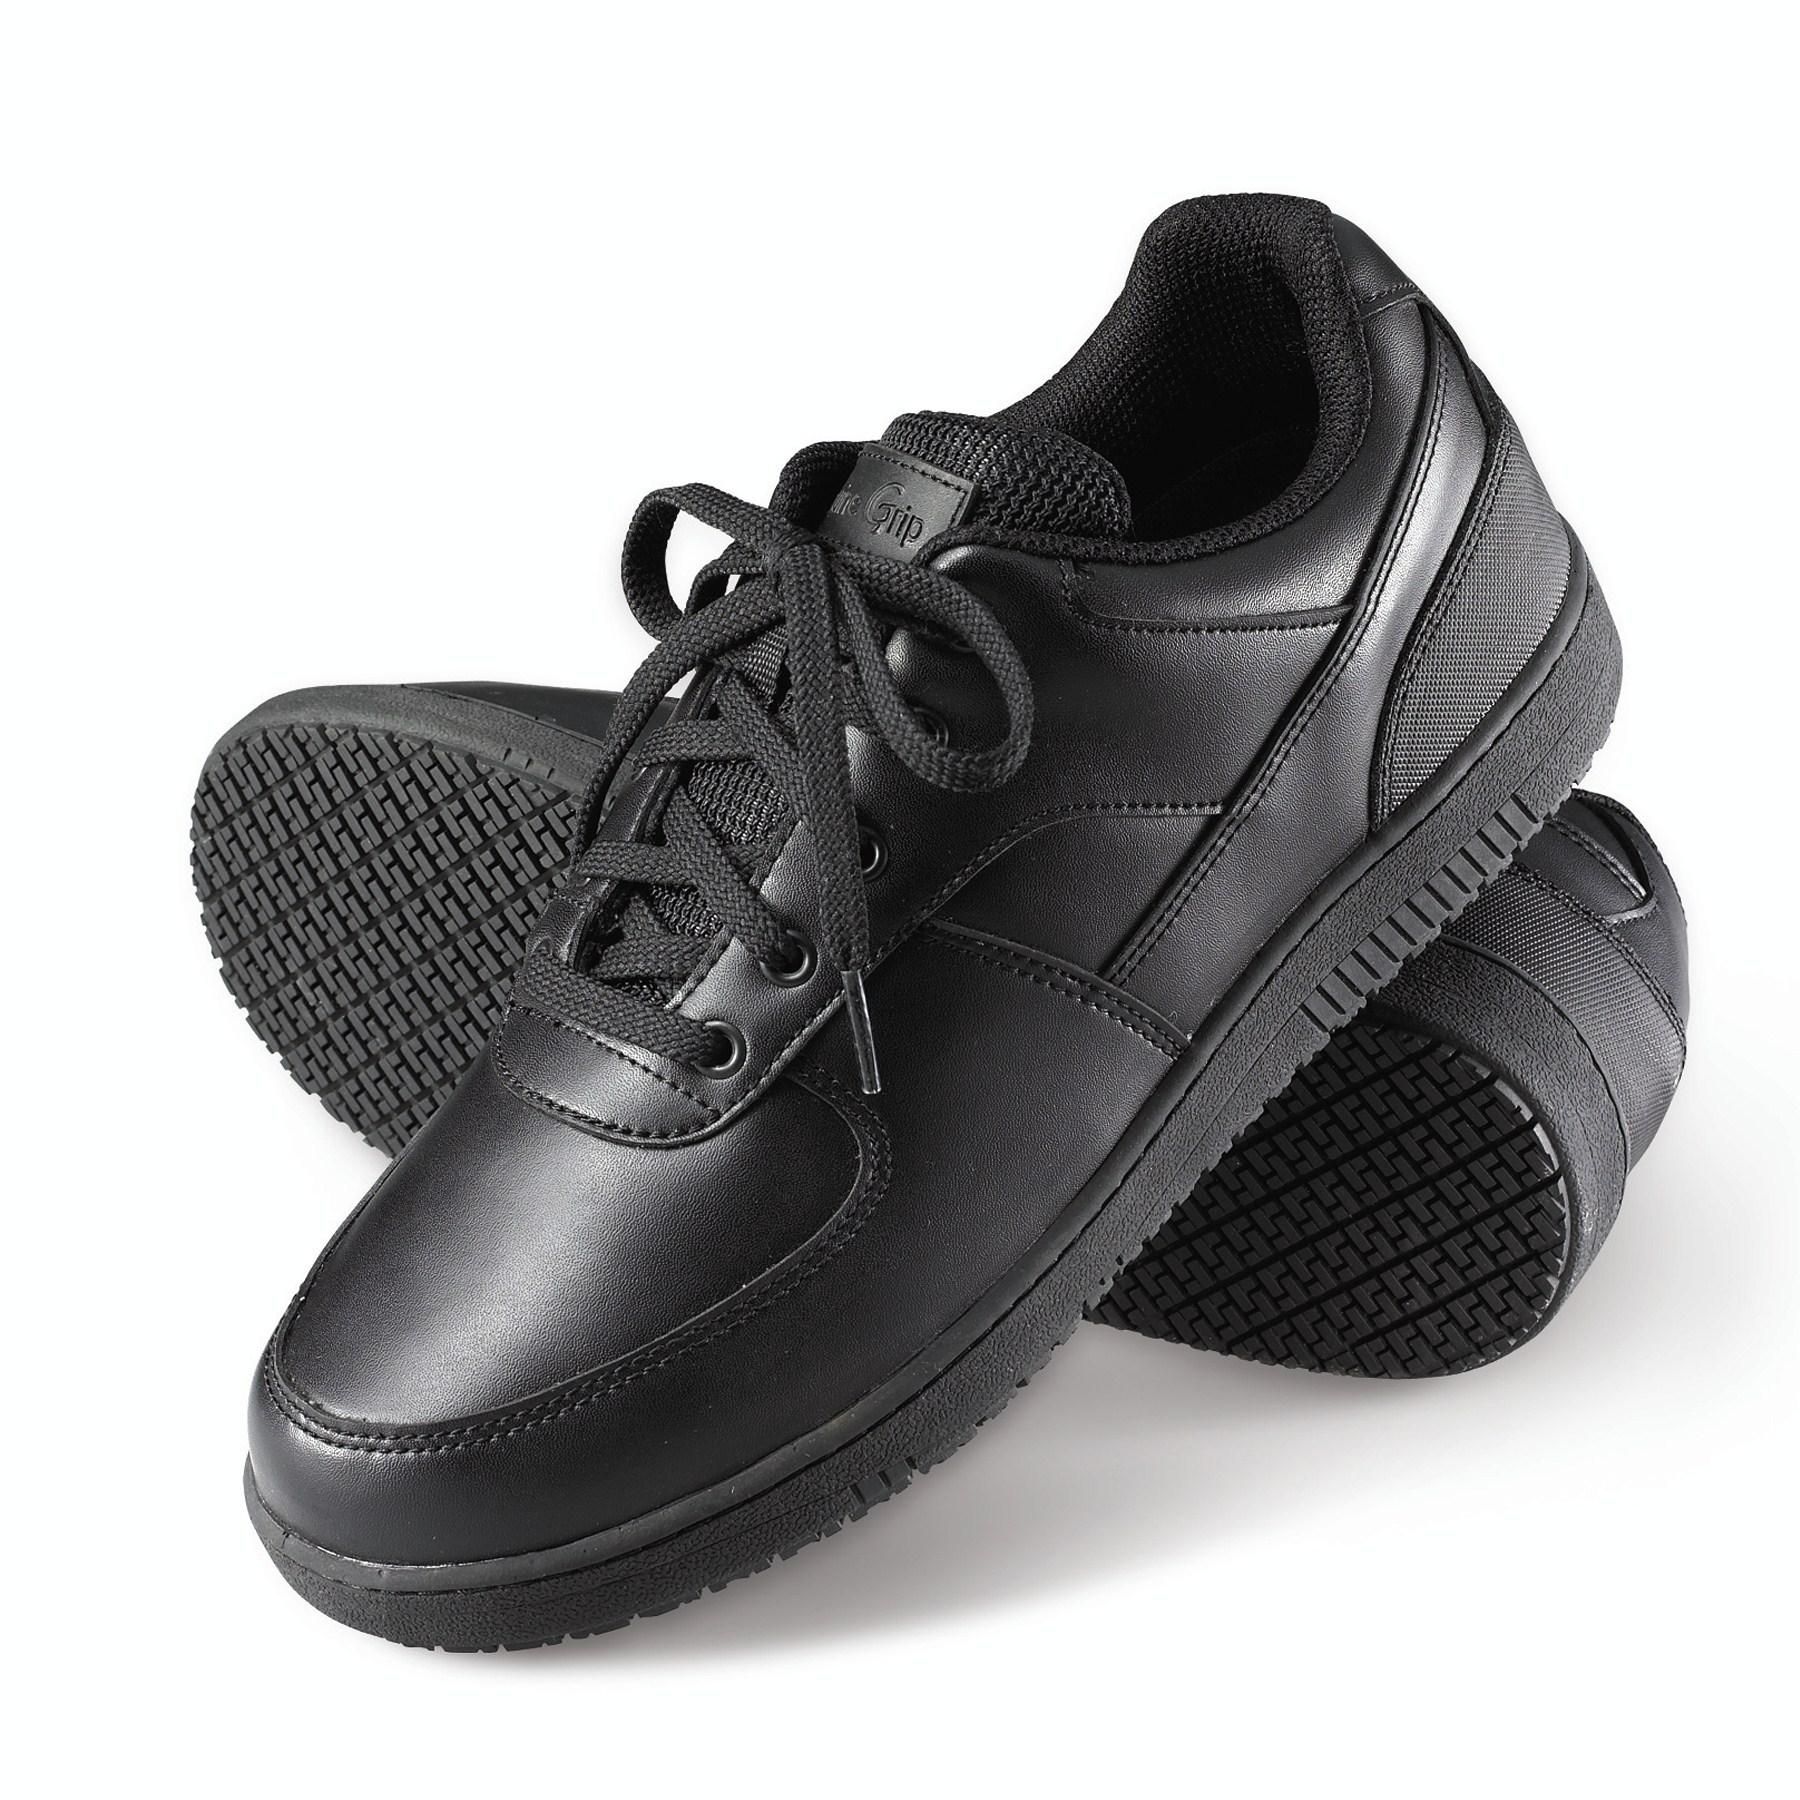 slip resistant shoes for work